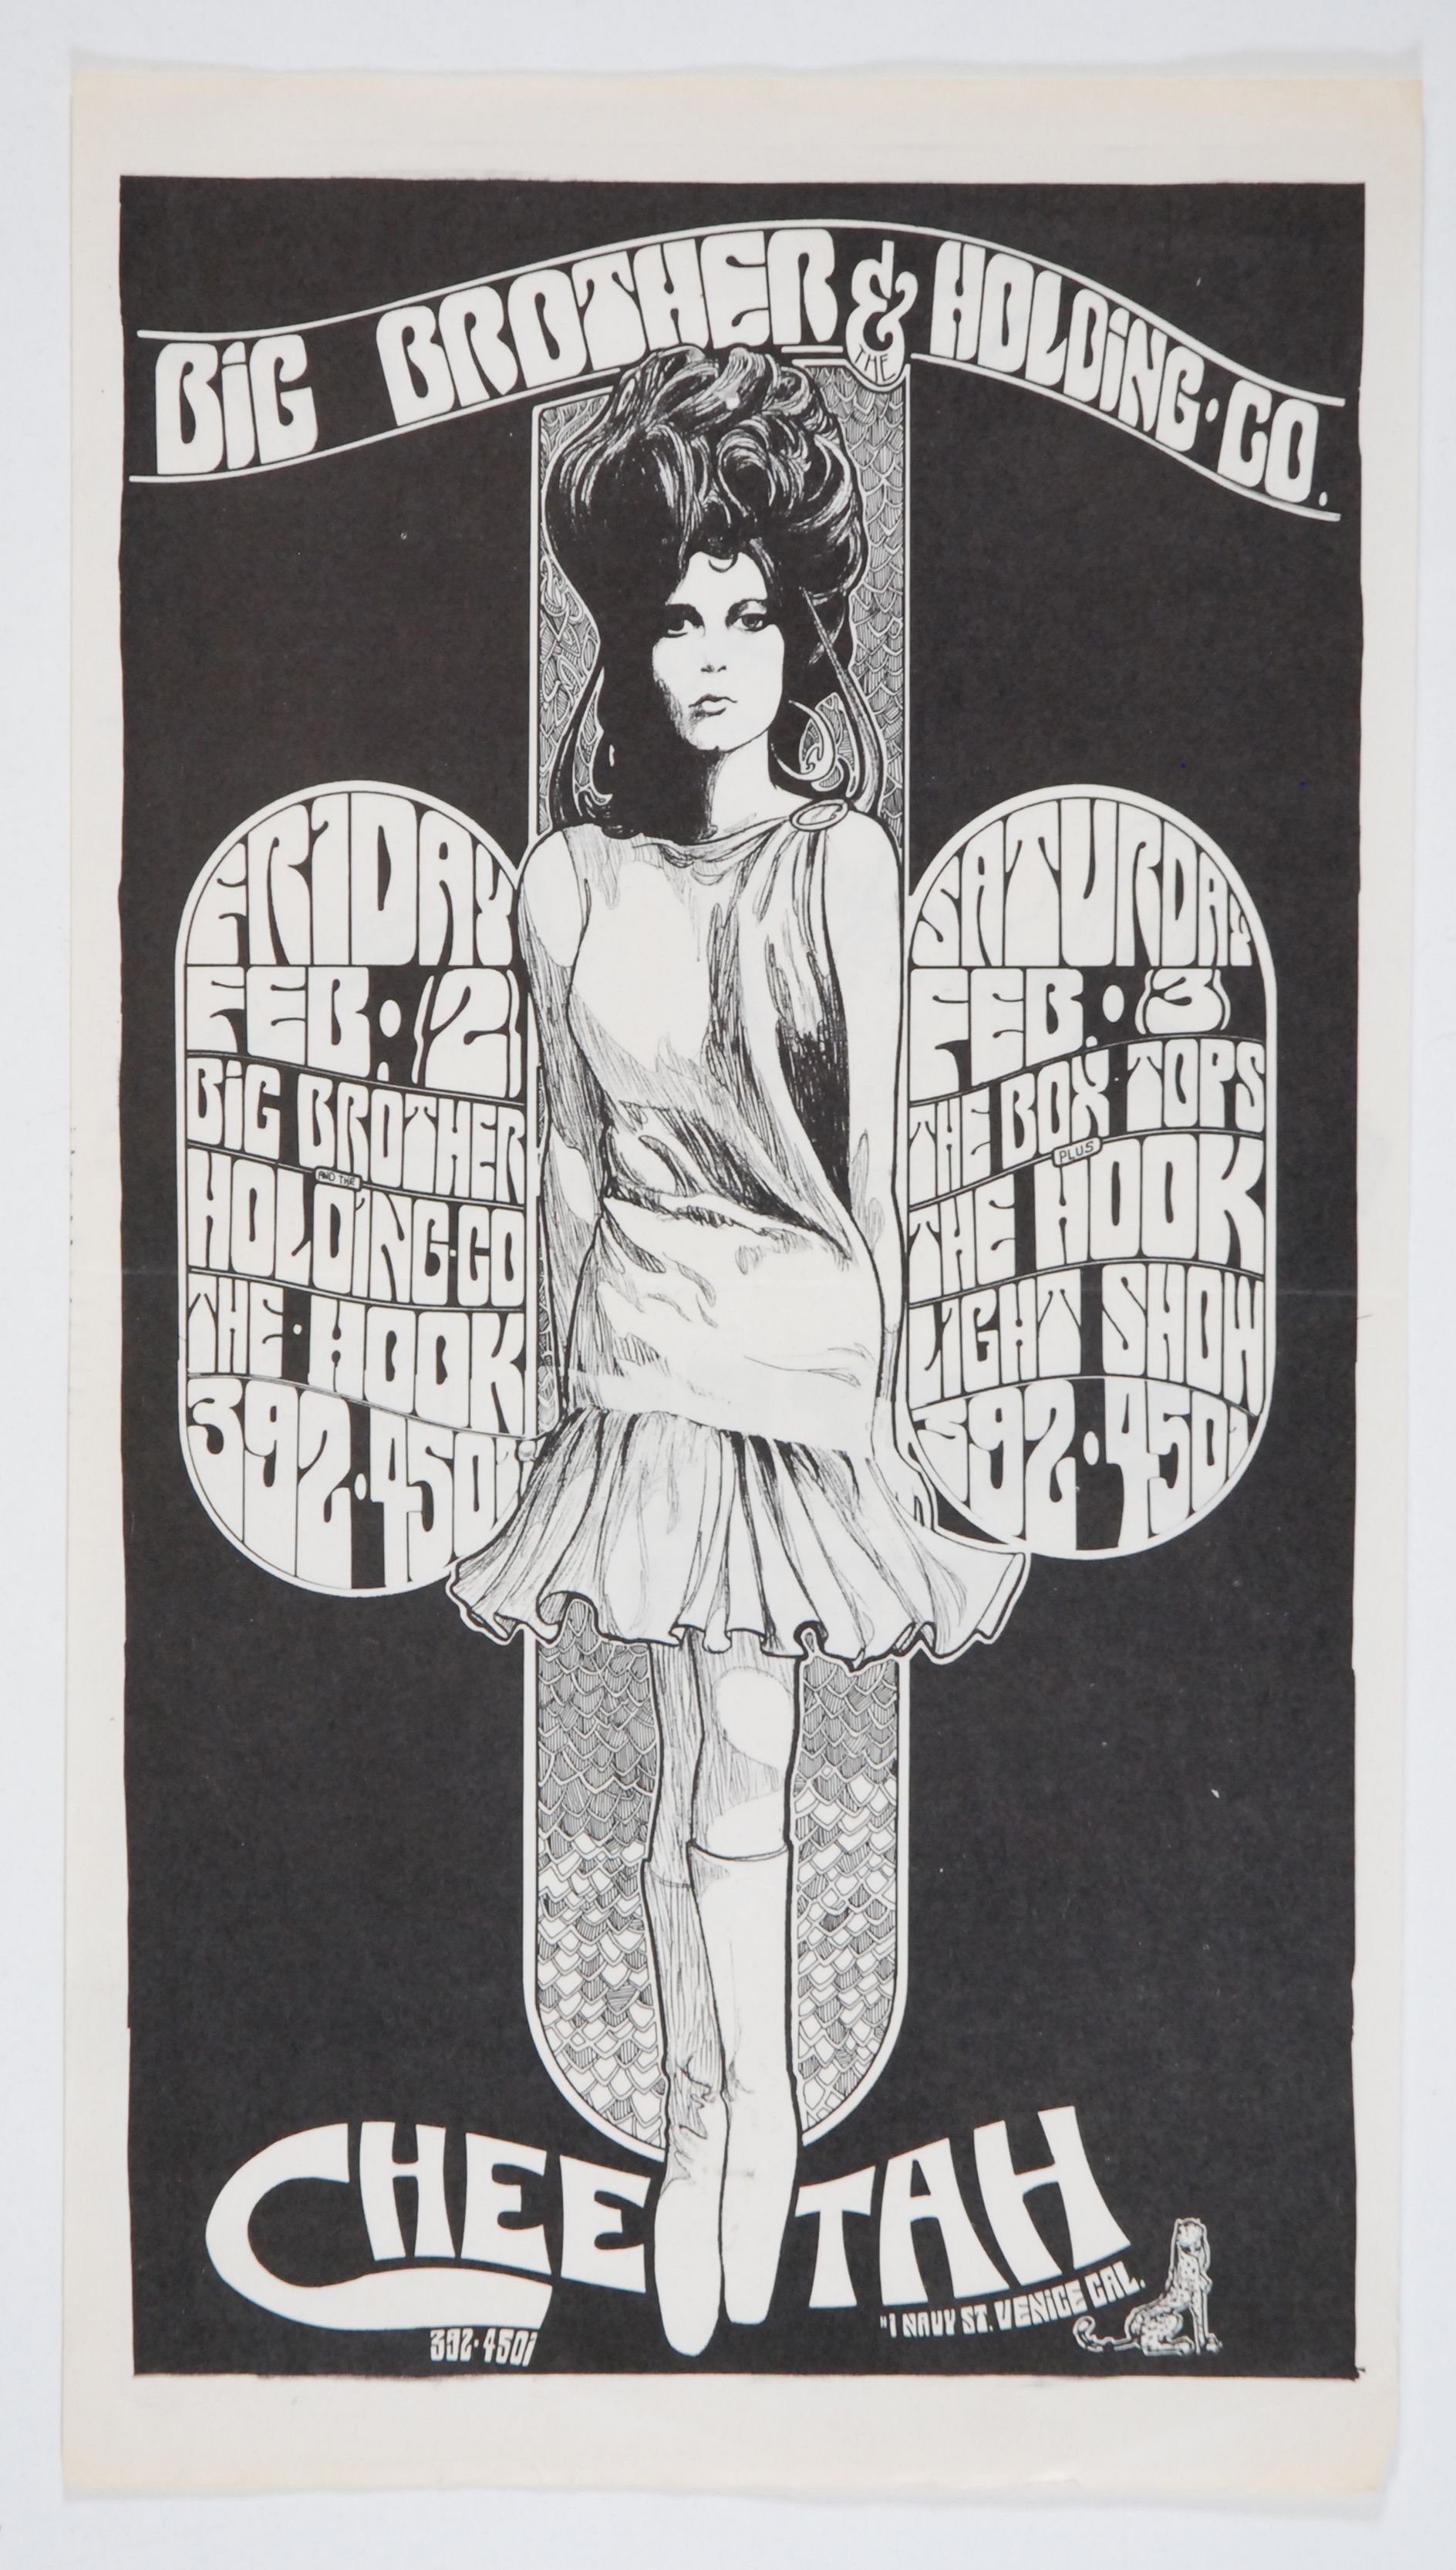 Big Brother & the Holding Company at The Cheetah Club 1968 Concert Poster